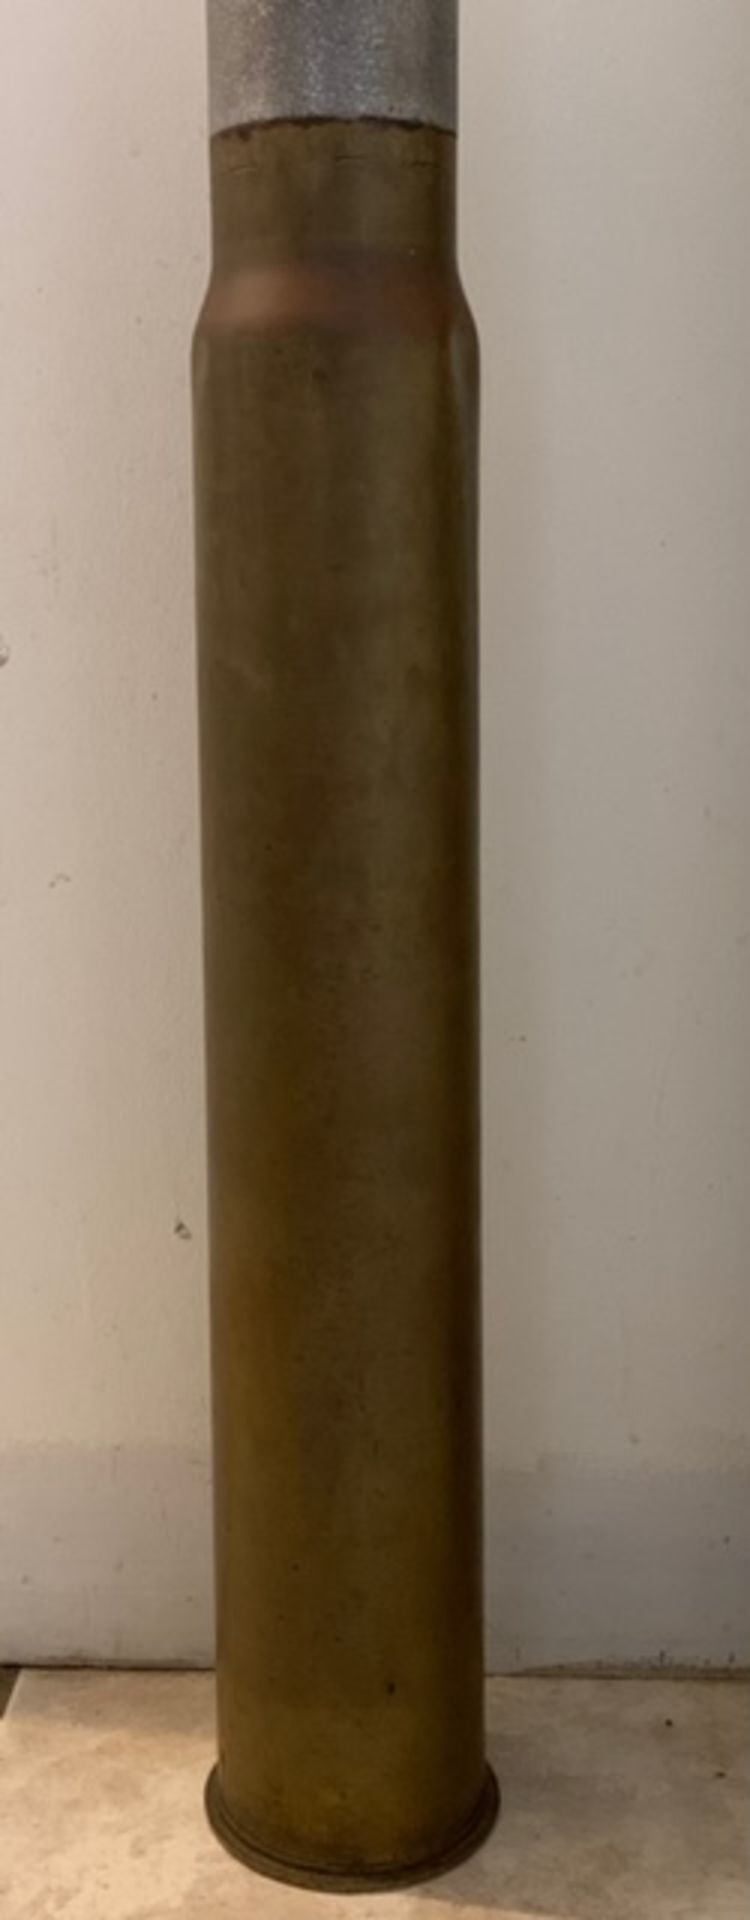 VINTAGE WW2 TRAINING ARTILLERY SHELL - MK7 MOD1 - 50 CALIBER DATED 4-1943 - US NAVY STAMPED - Image 3 of 5